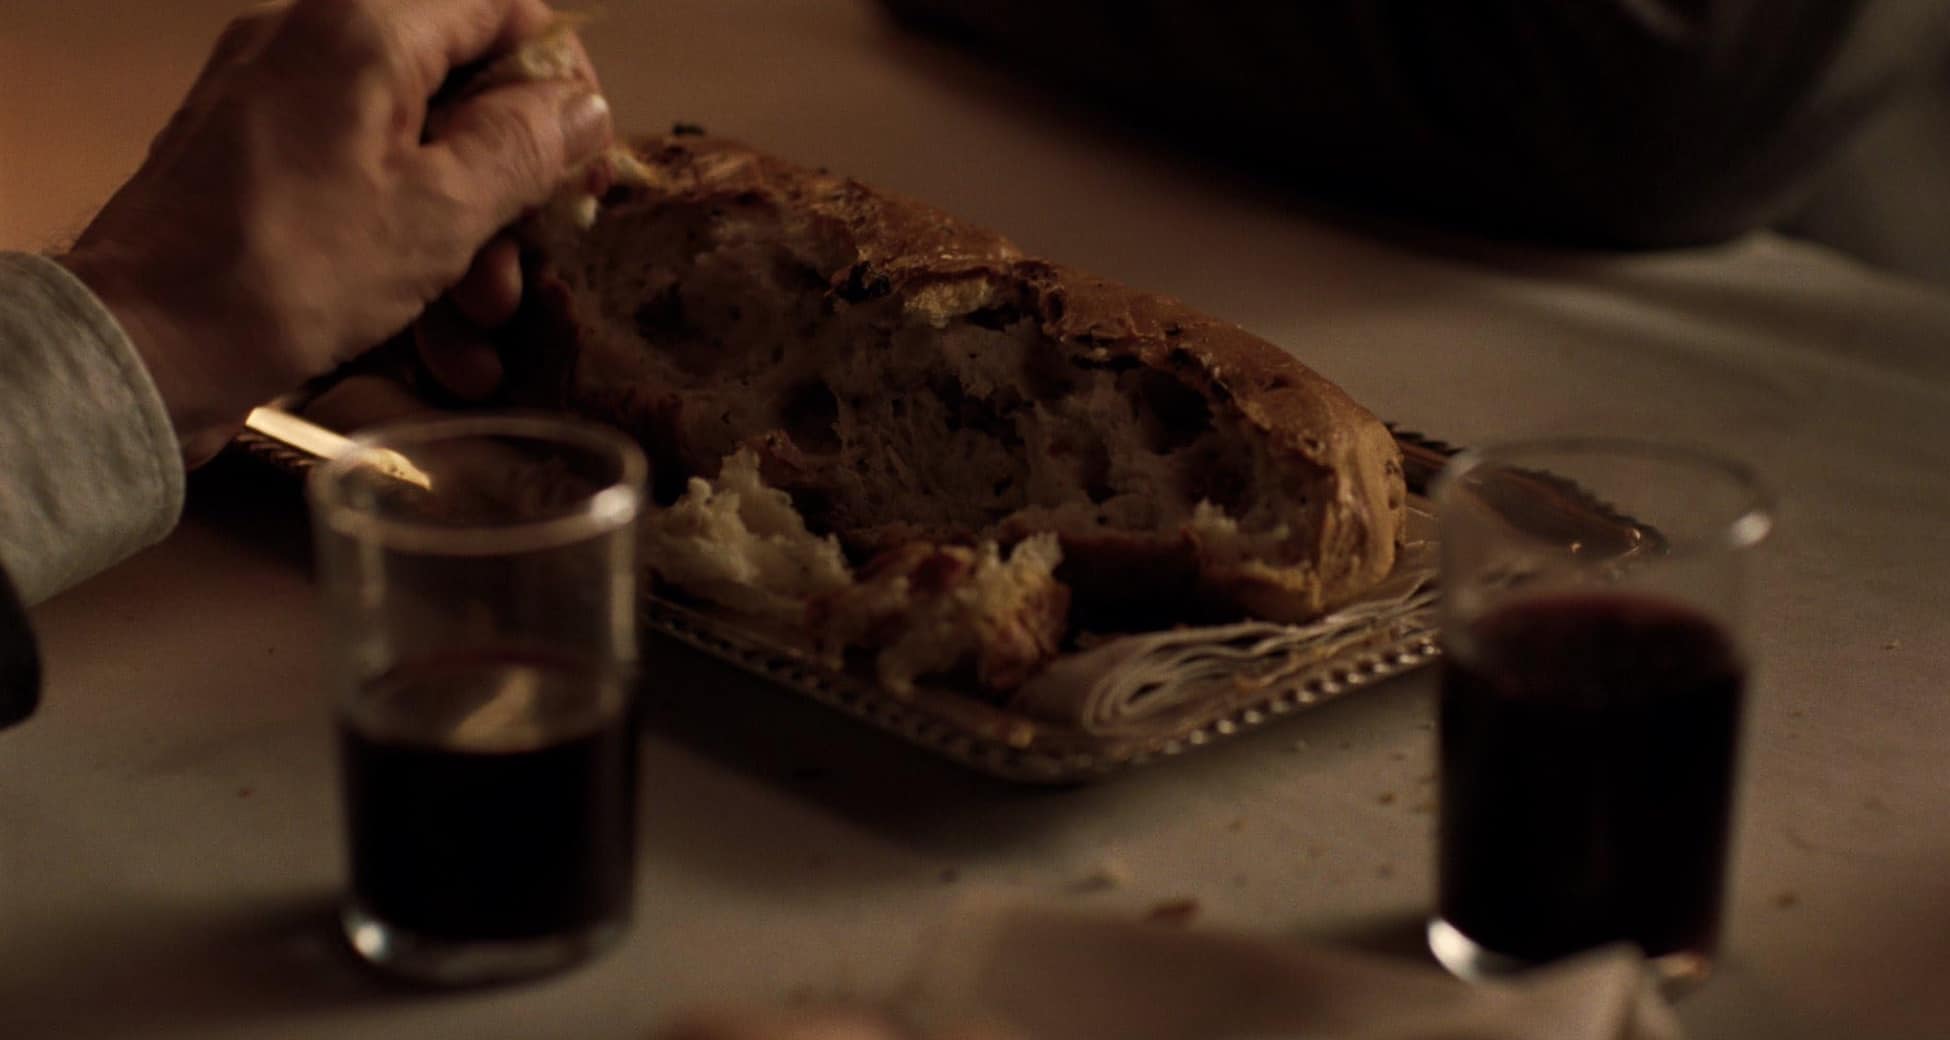 A man tears a piece off a loaf of bread with red wine in his glass in this image from Tribeca Productions.